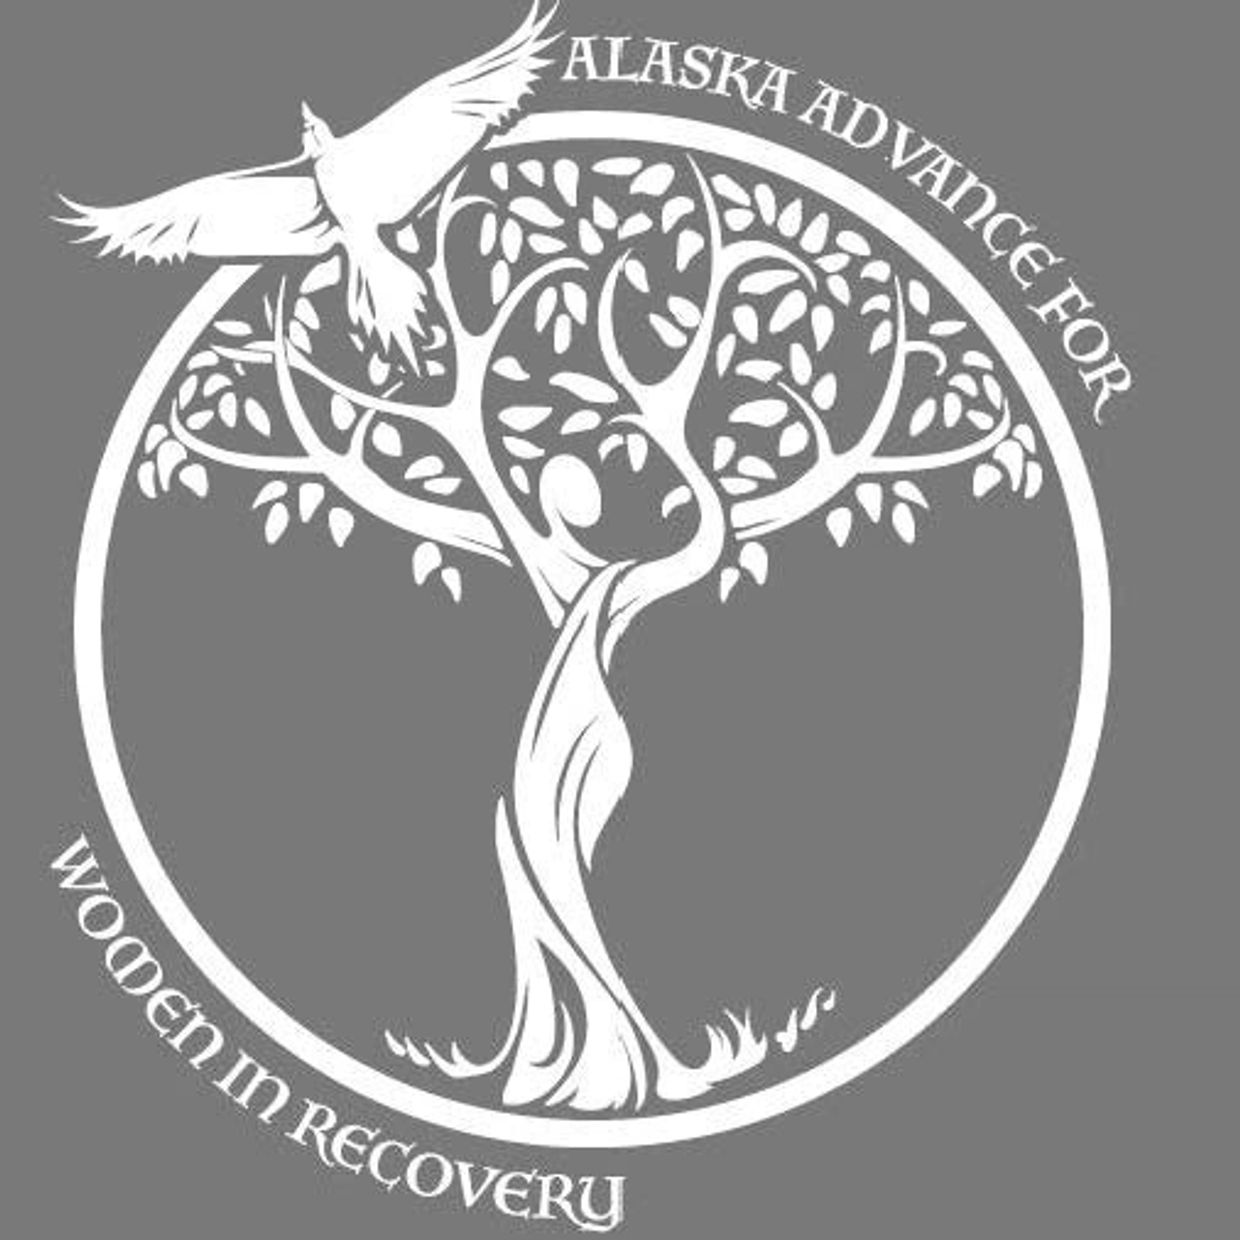 The Alaska Advance for Women Logo developed by those in participation and cooperation of The Non Pro